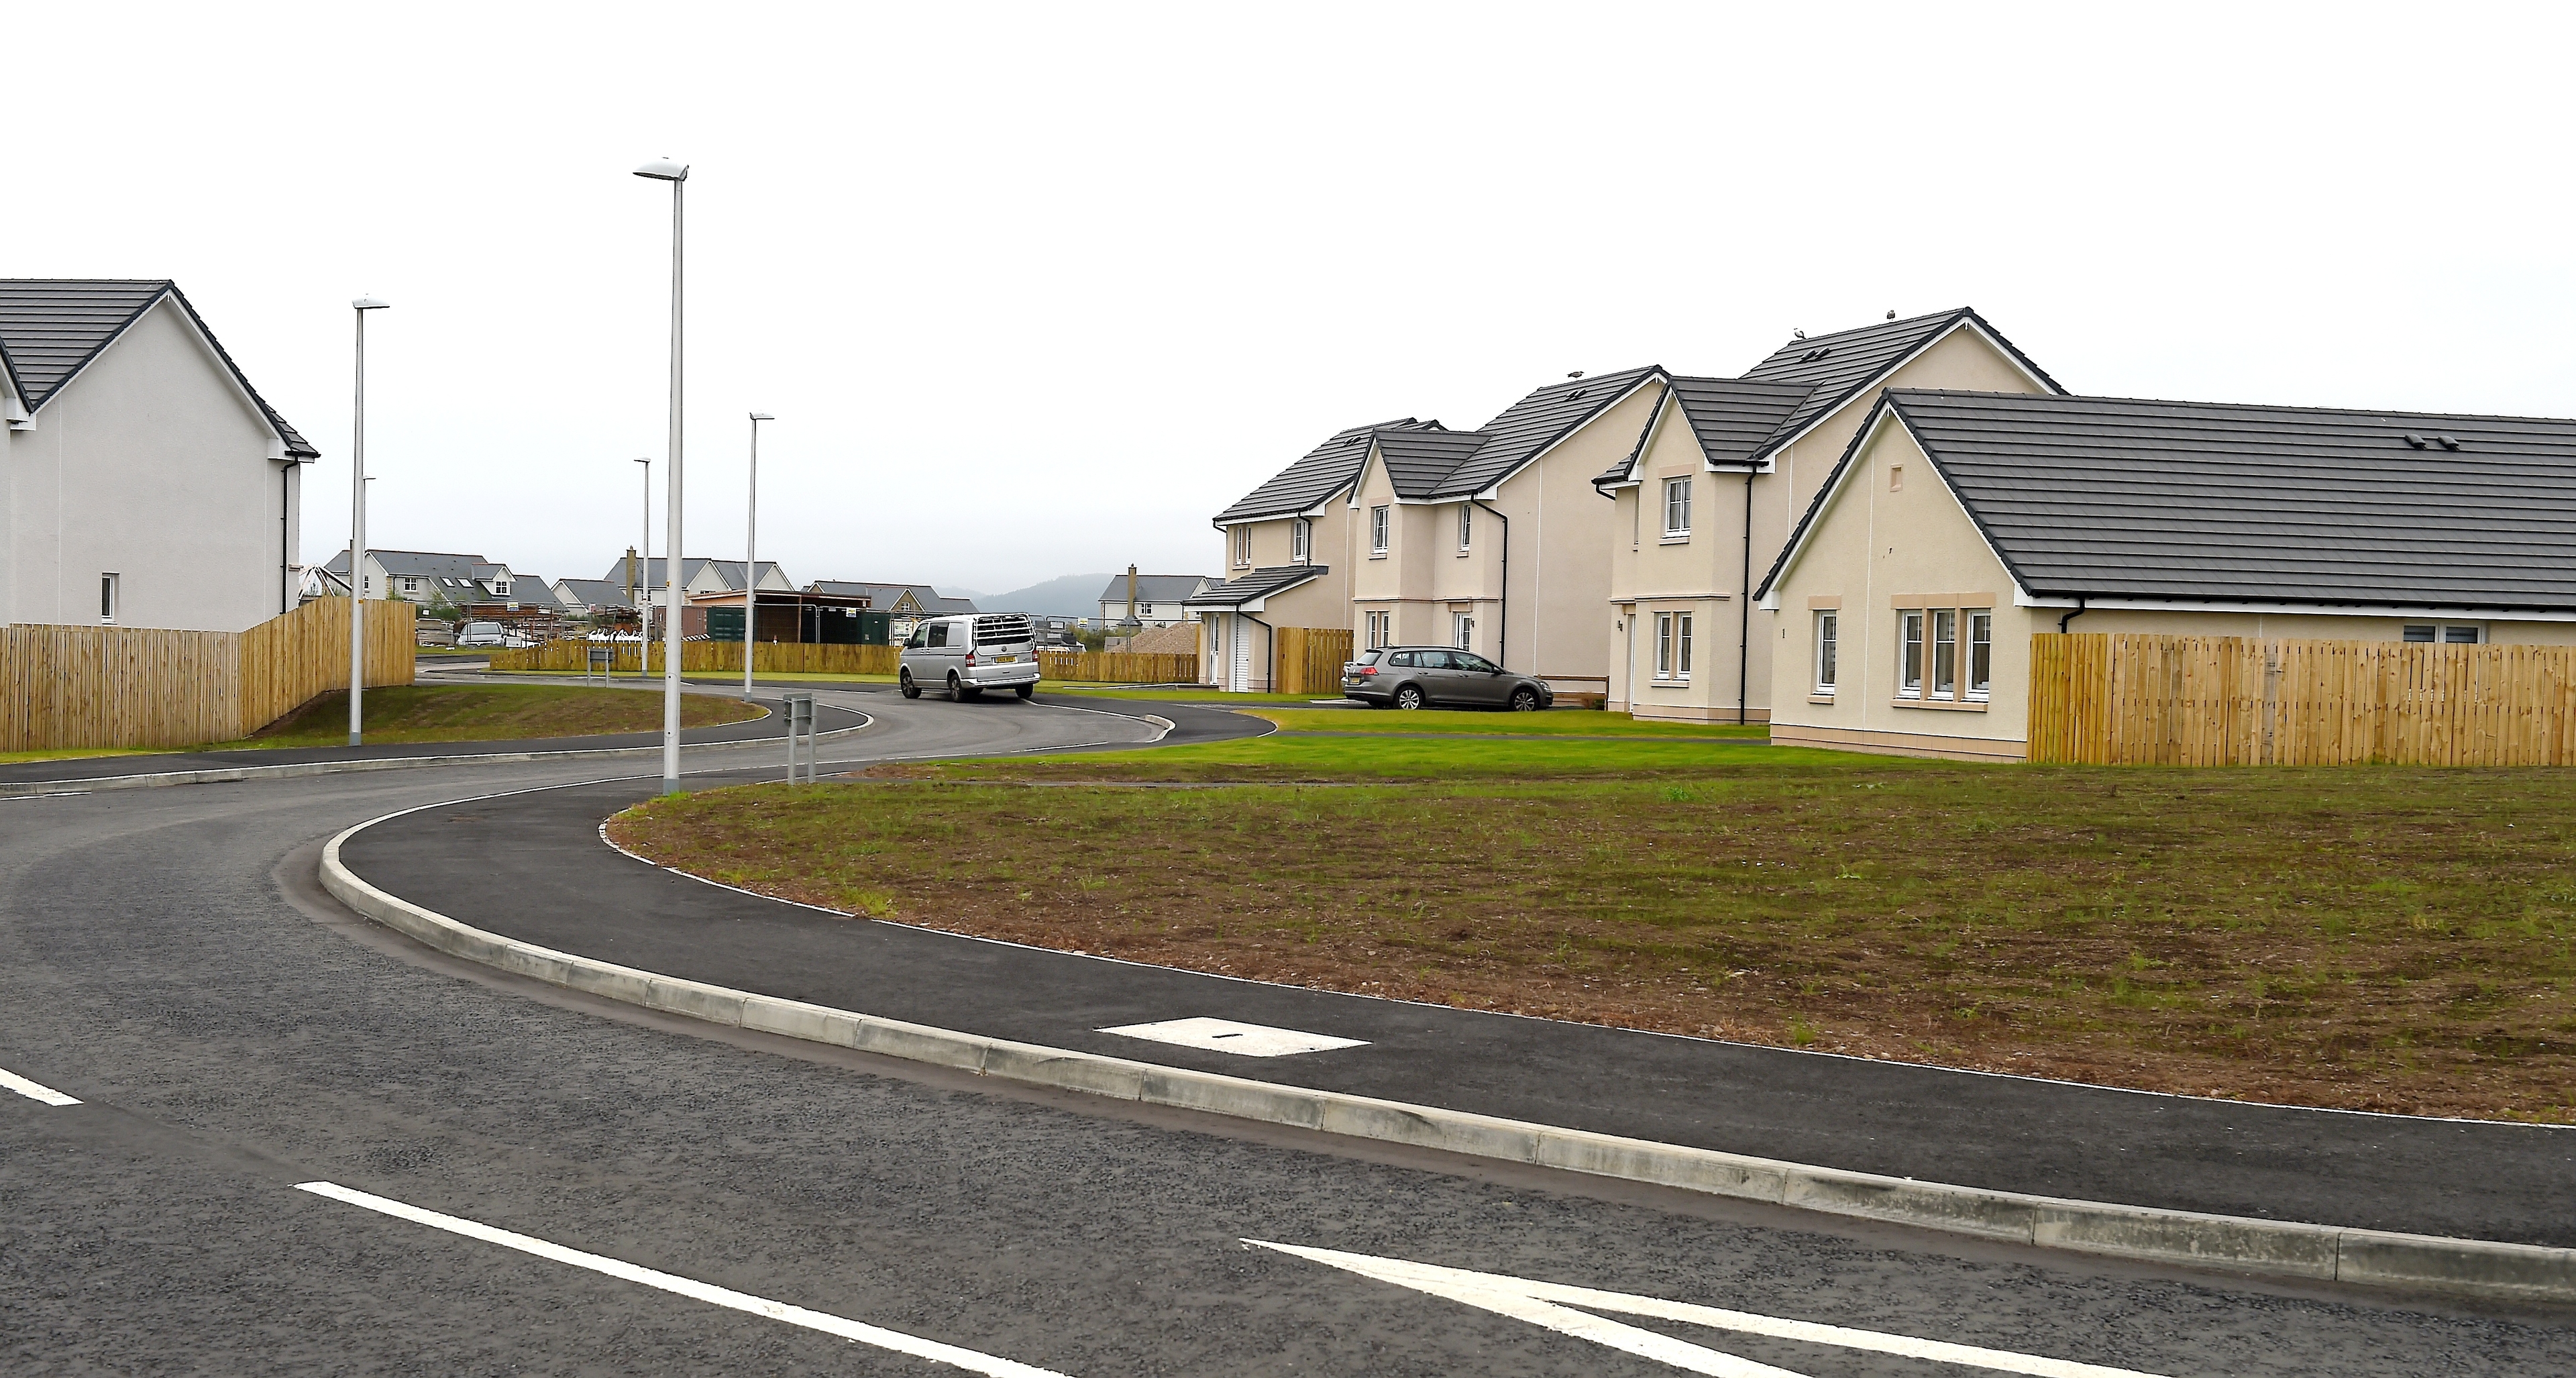 The current Tulloch Homes development at Chanonry.